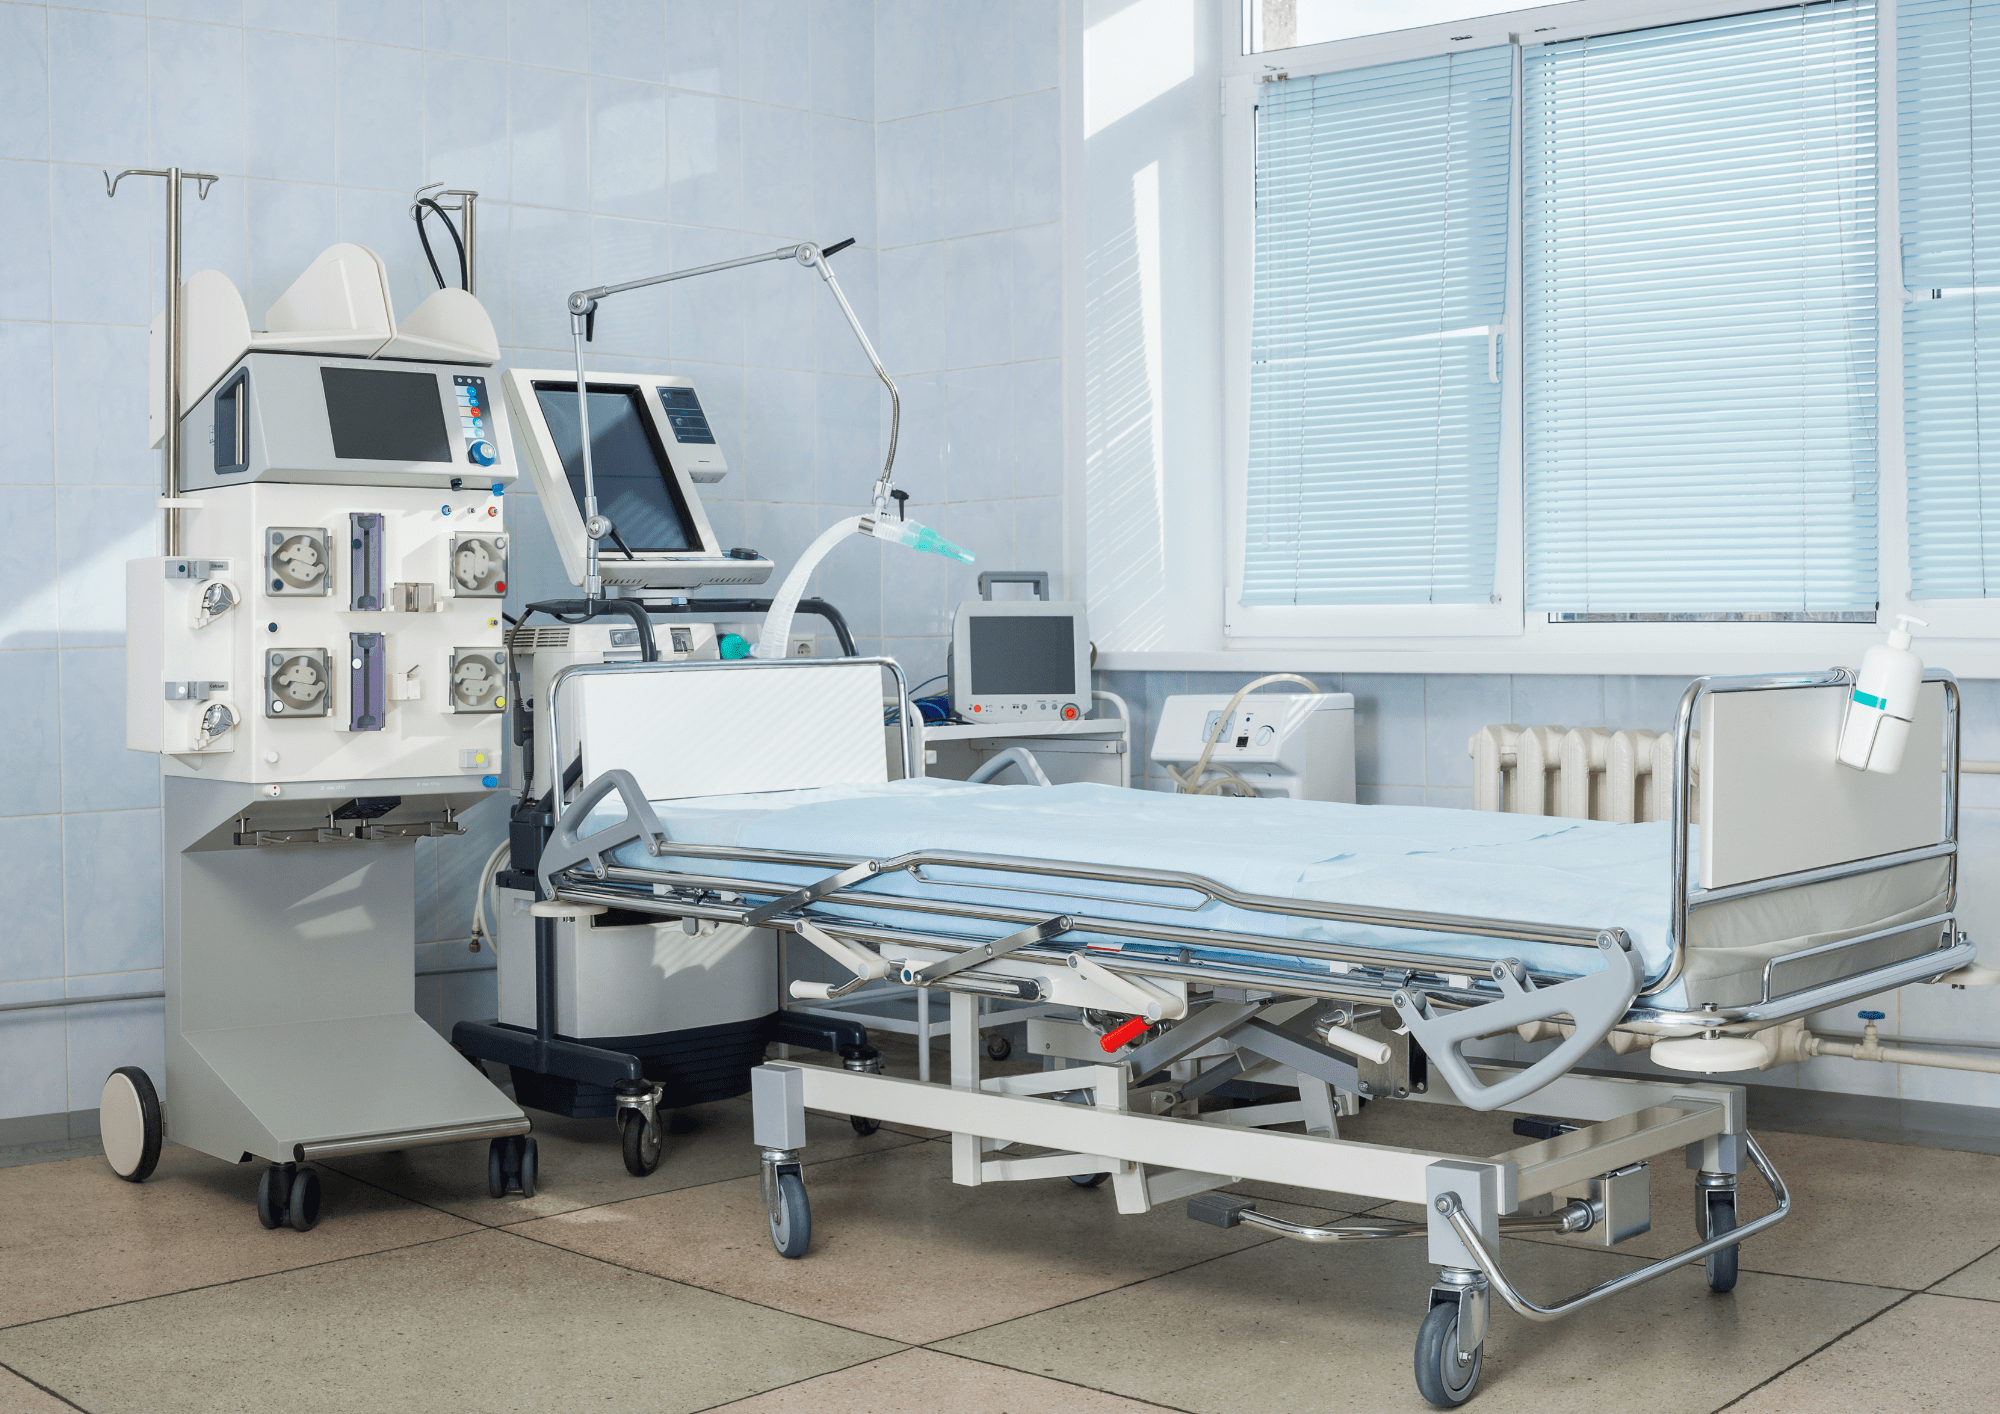  various types of hospital beds with unique features and adjustments